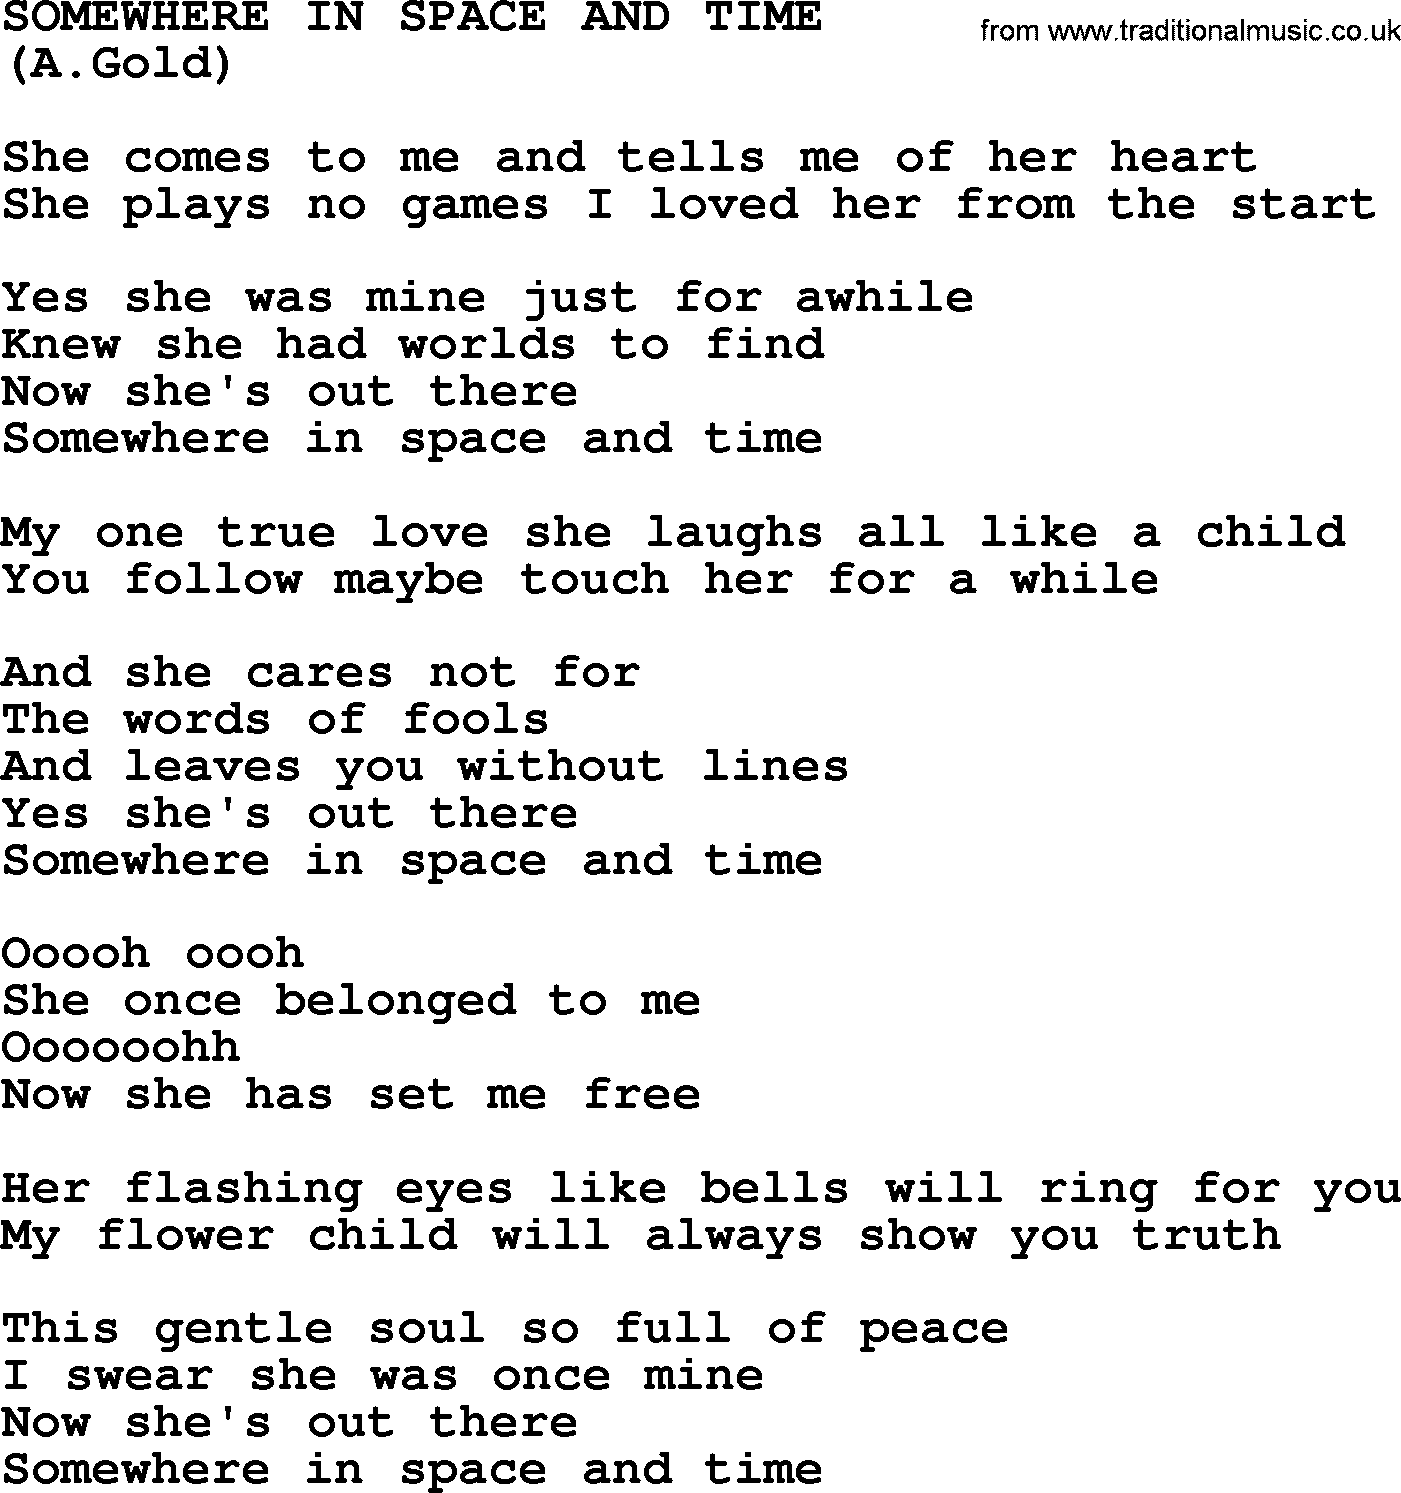 The Byrds song Somewhere In Space And Time, lyrics